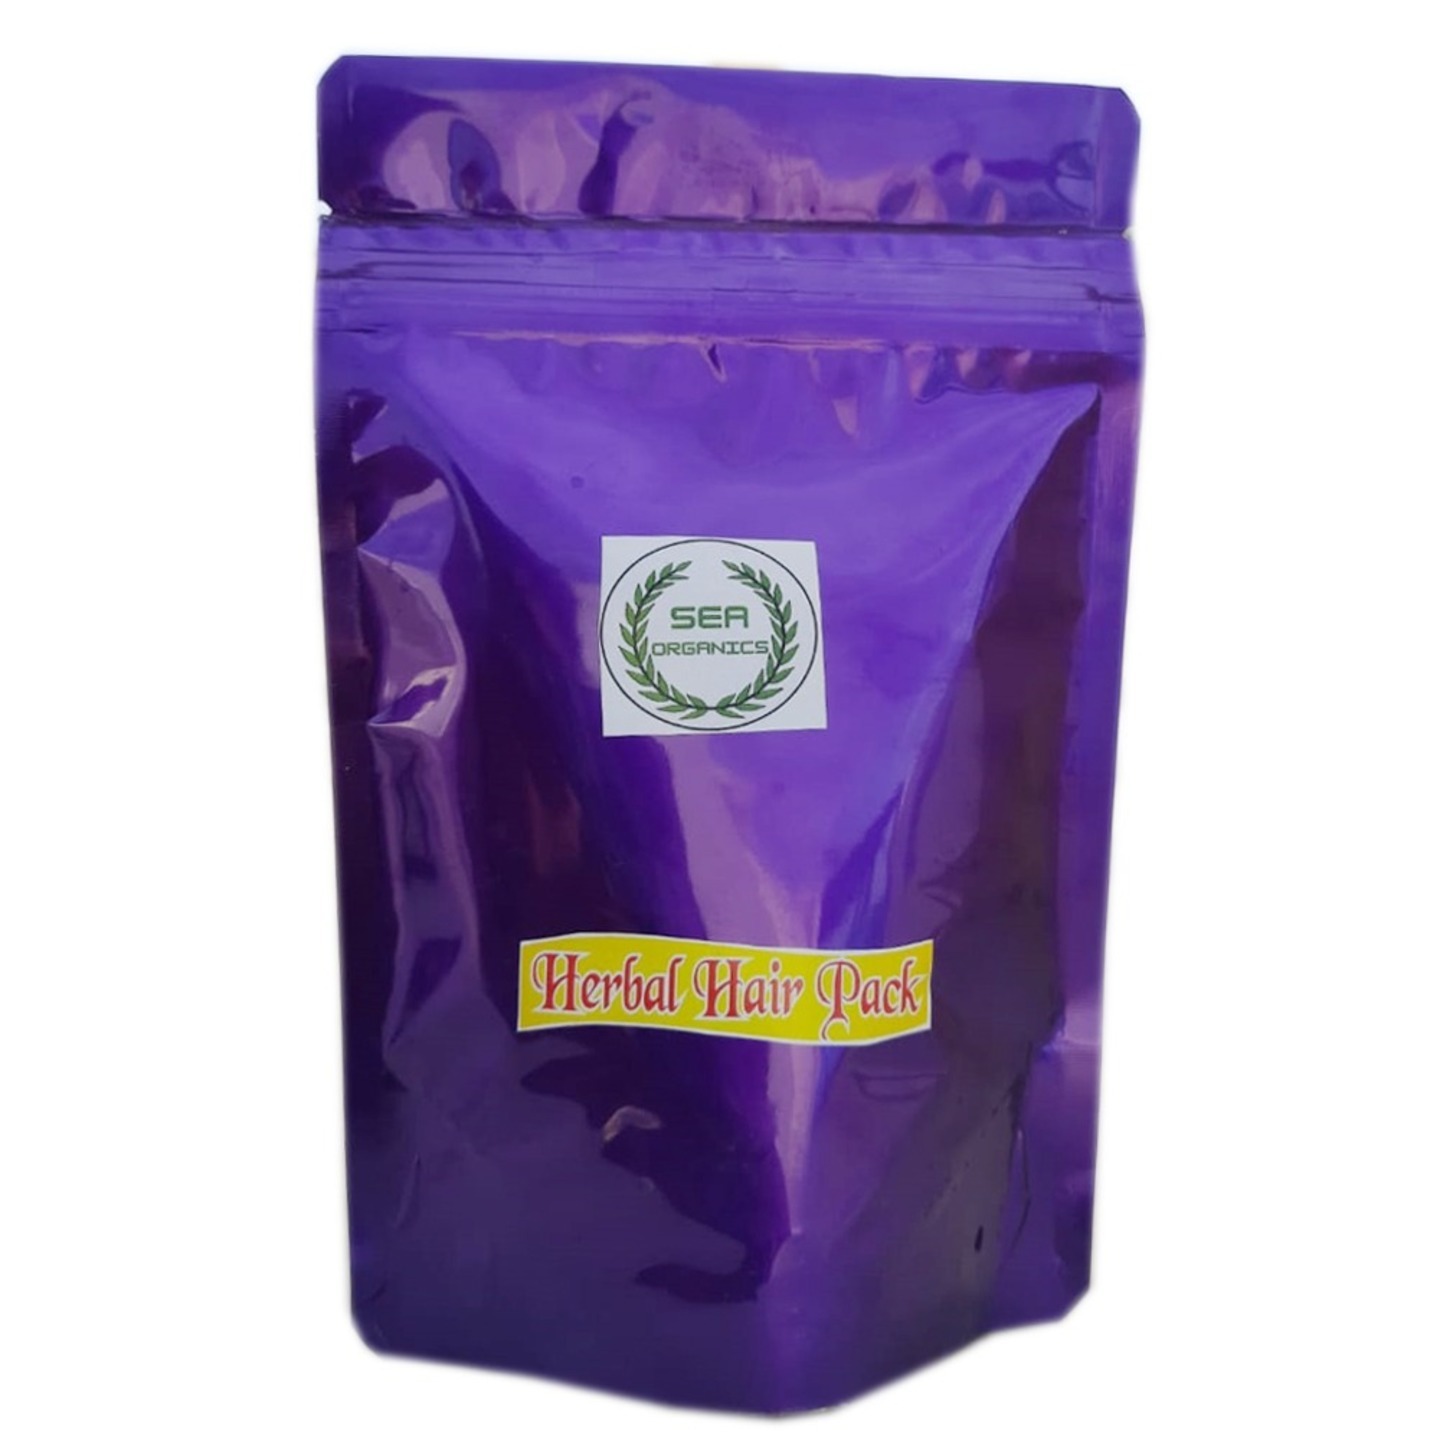 SEA HERBAL HAIR PACK - 75 Grams - Reduces body heat, hair problems and dandruffs, improves hair growth, silky and shiny